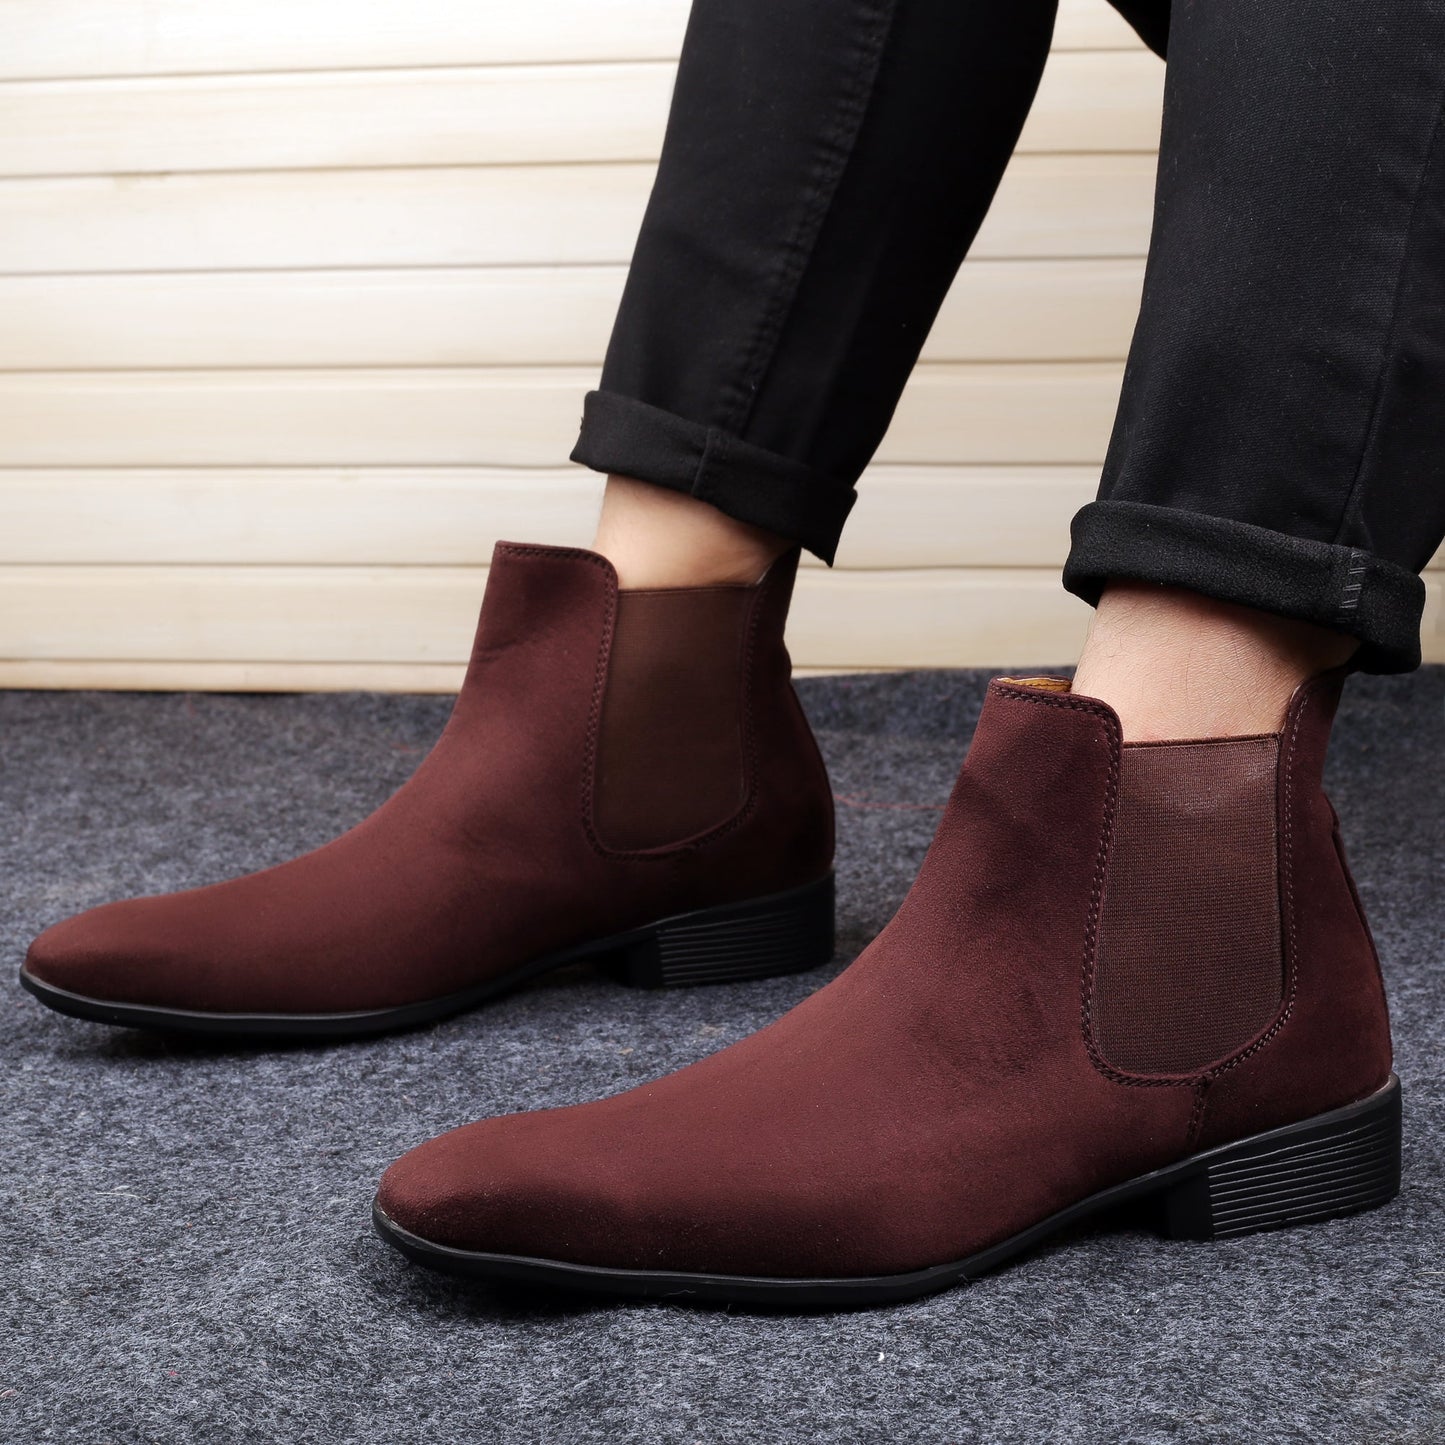 Stylish Suede Chelsea Brown Boot For Men Party And Casual Wear -JackMarc